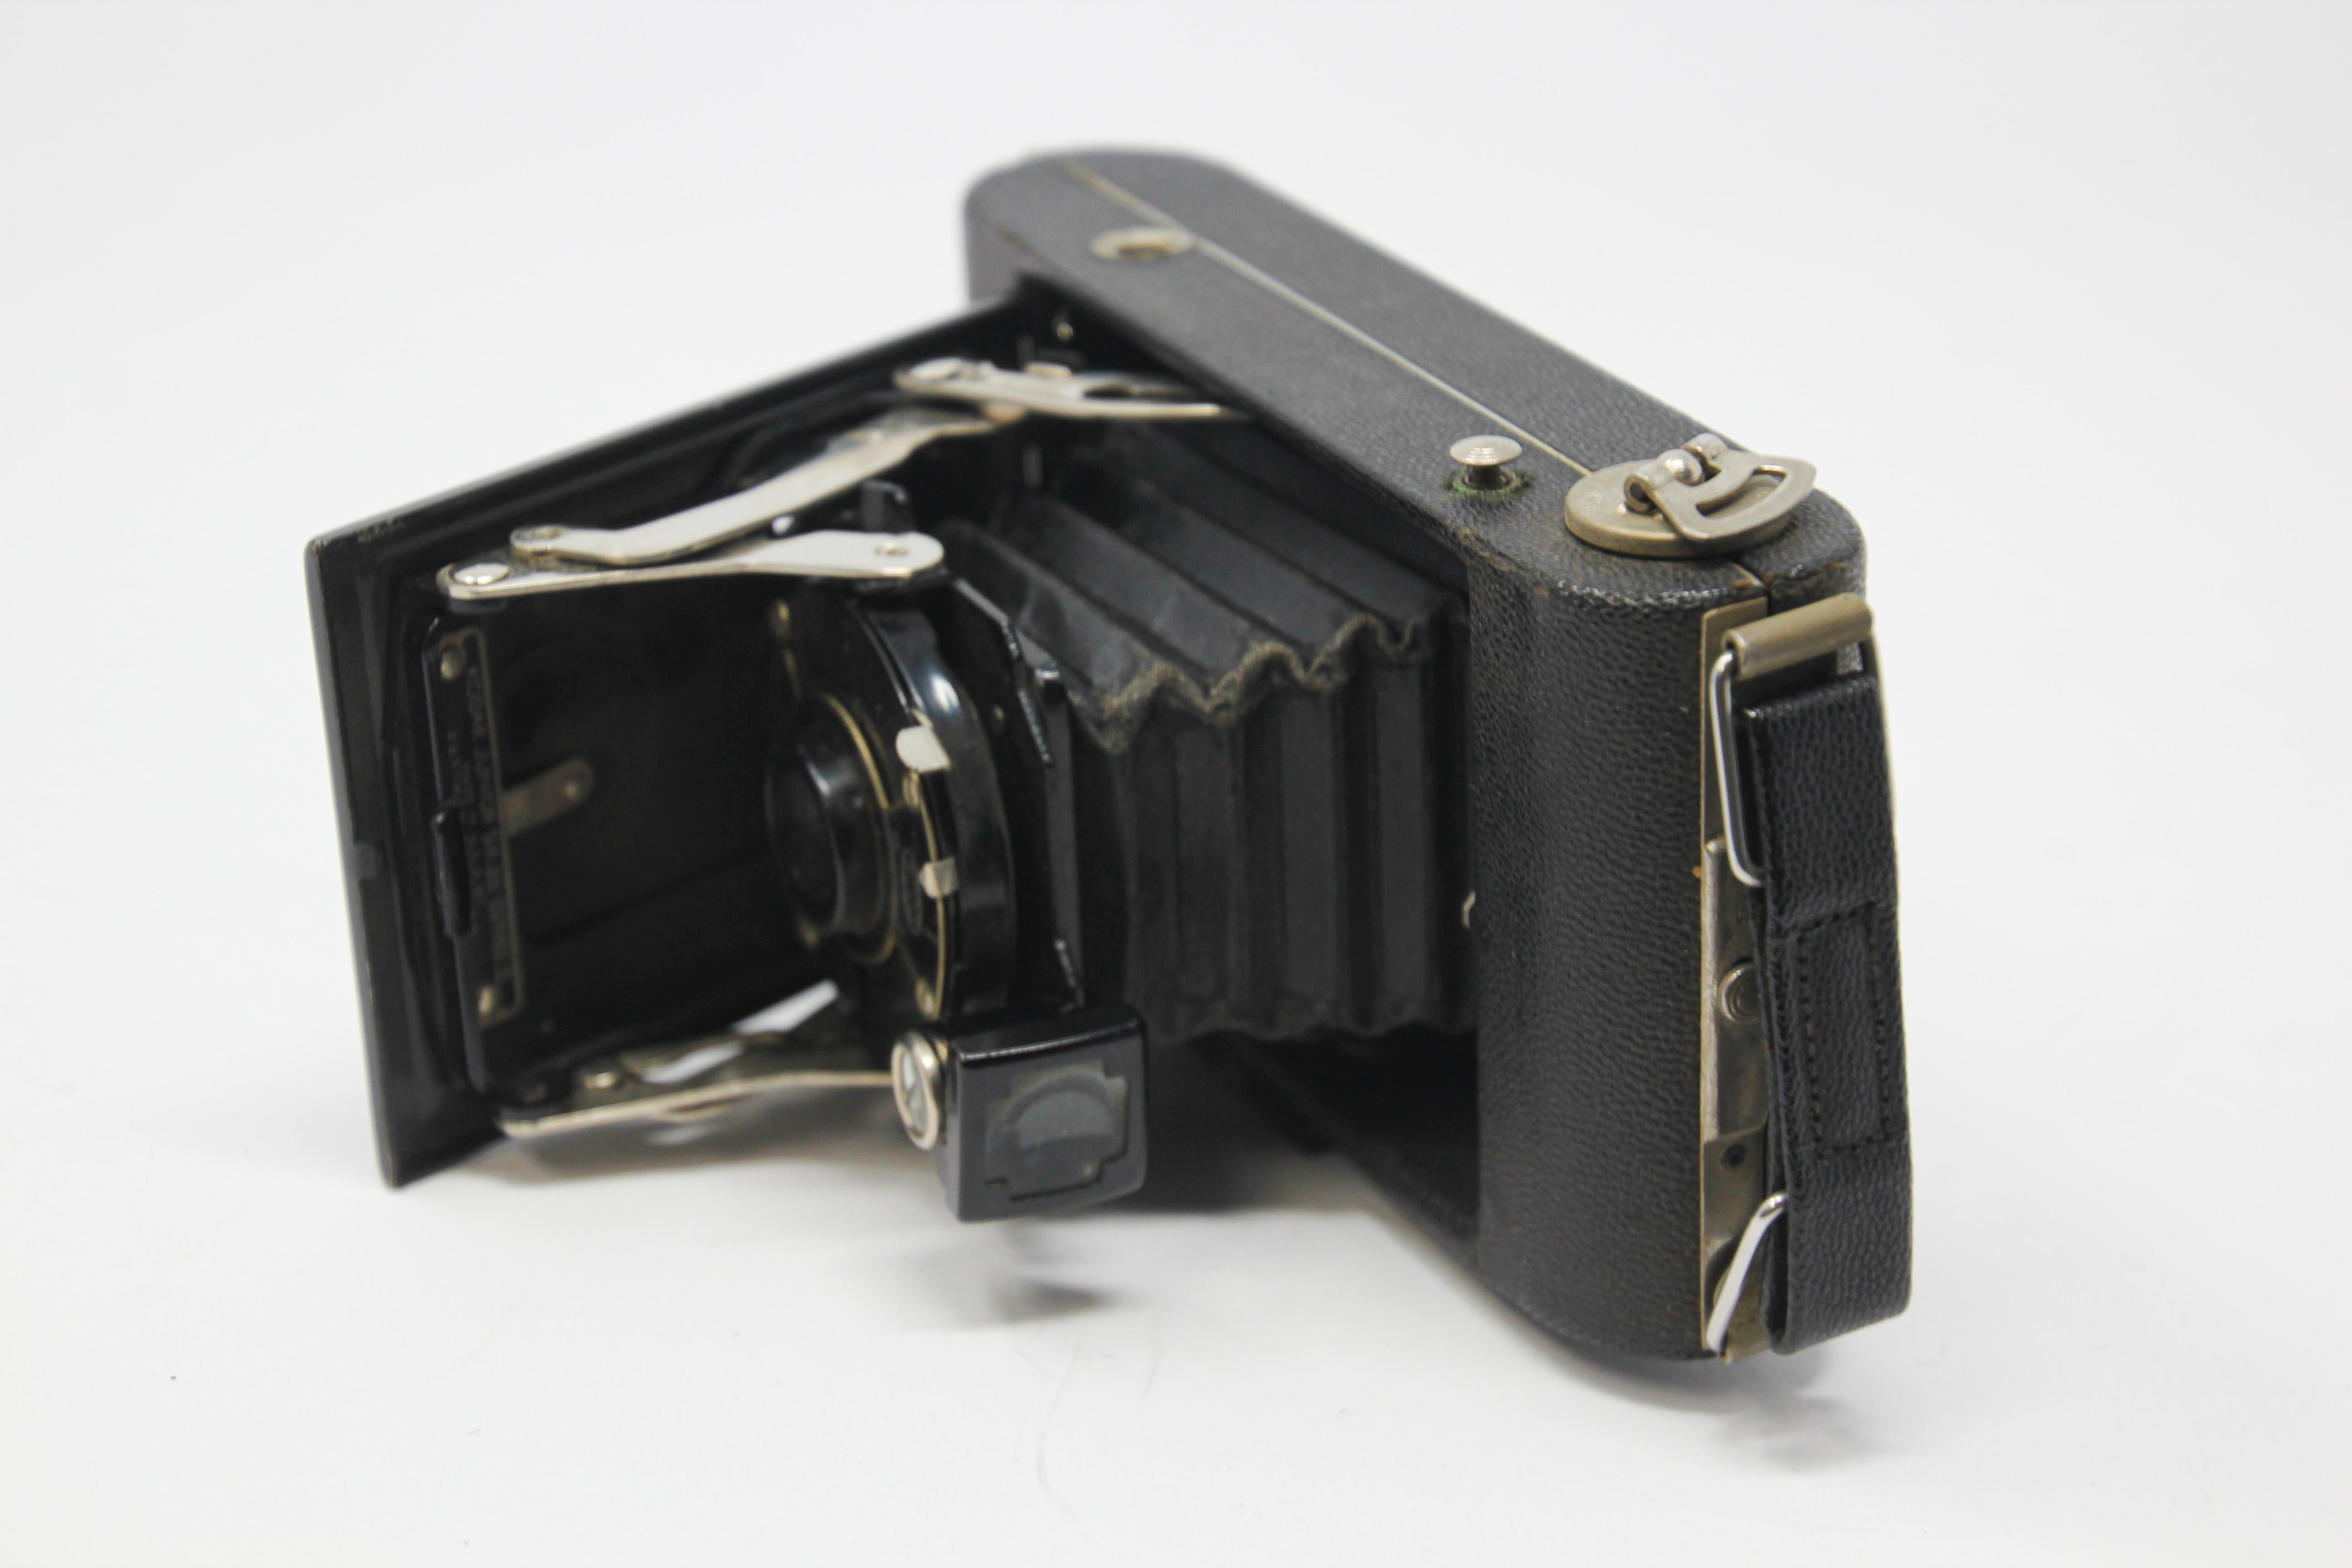 Collectible antique 1920s Kodak film camera in hard leather case.
With original leather case stamped made in Belgium.
Antique No. 3A Special Autographic Folding Pocket Model C Kodak with Zeiss Kodak Anastigmat Lens 6.3.
The 3A Folding Pocket Kodak,